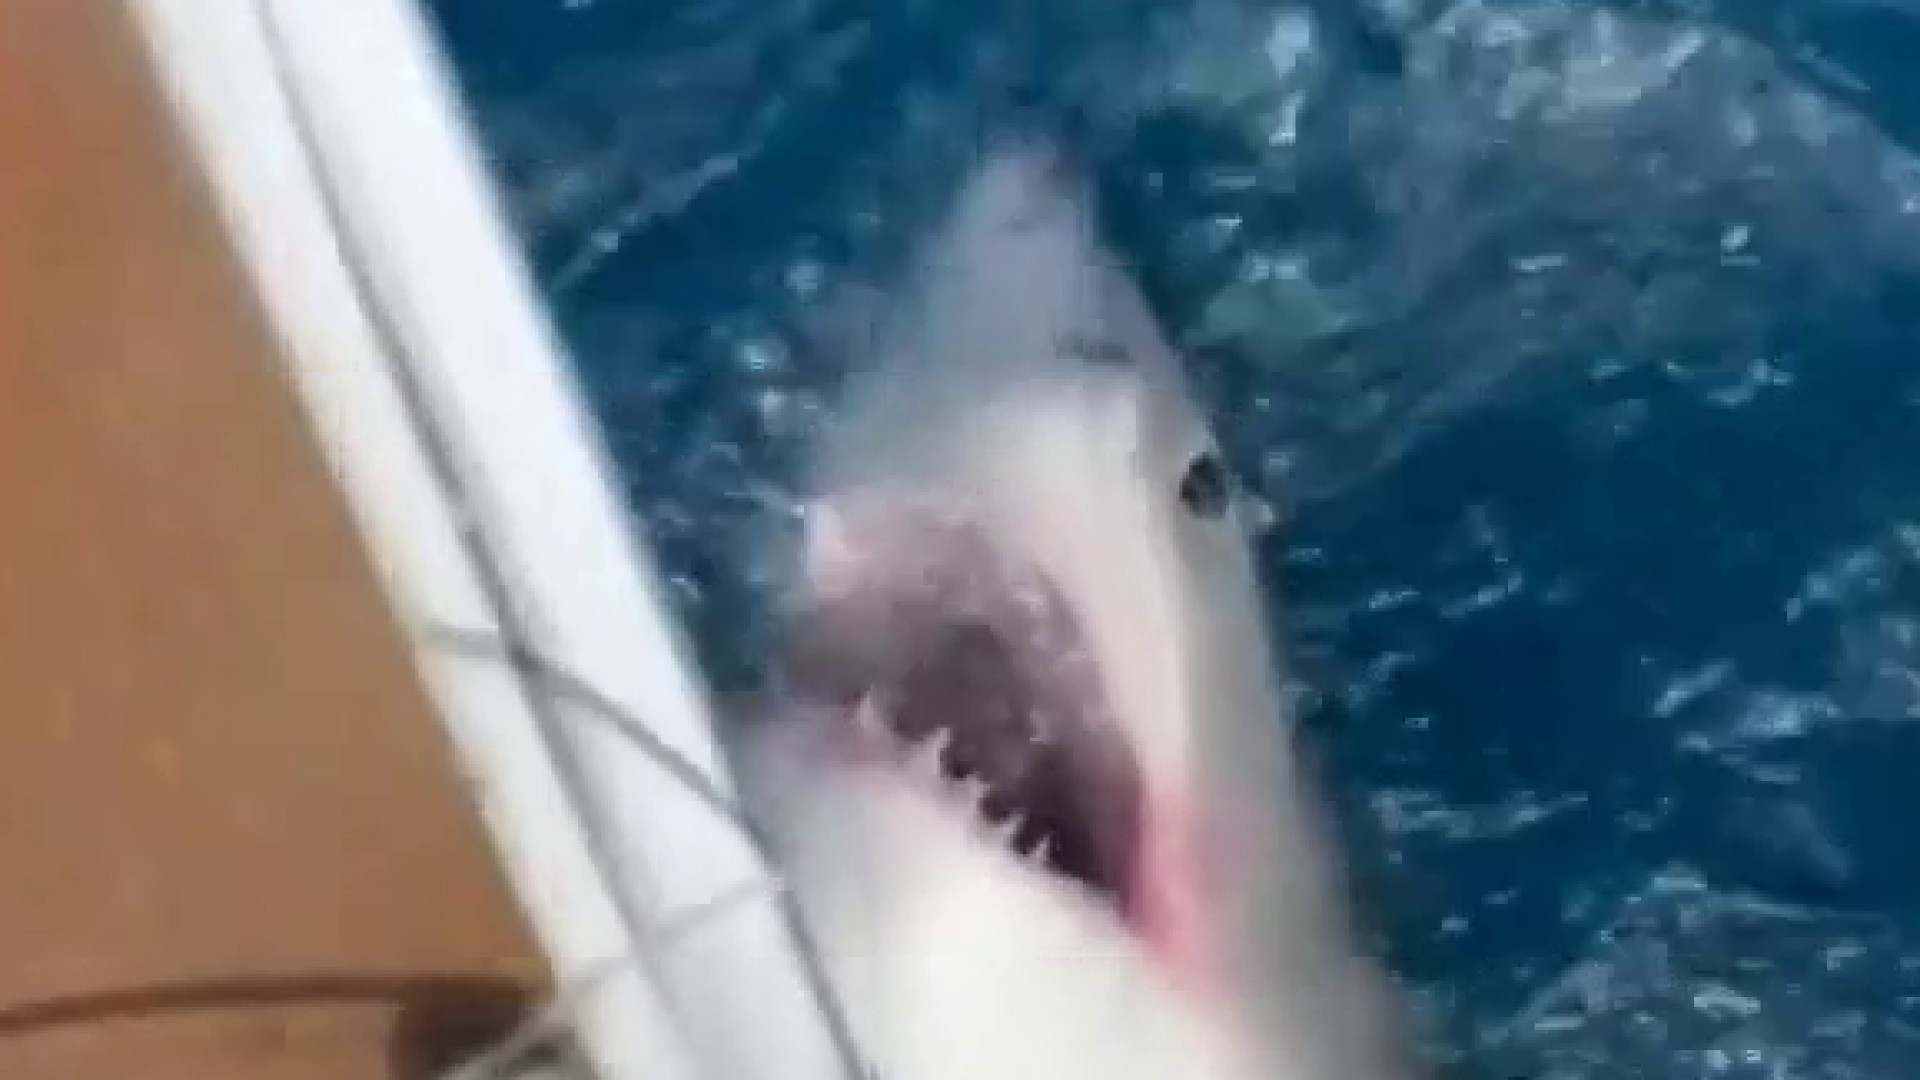 It did make me really excited:' Boy catches 11-foot great white